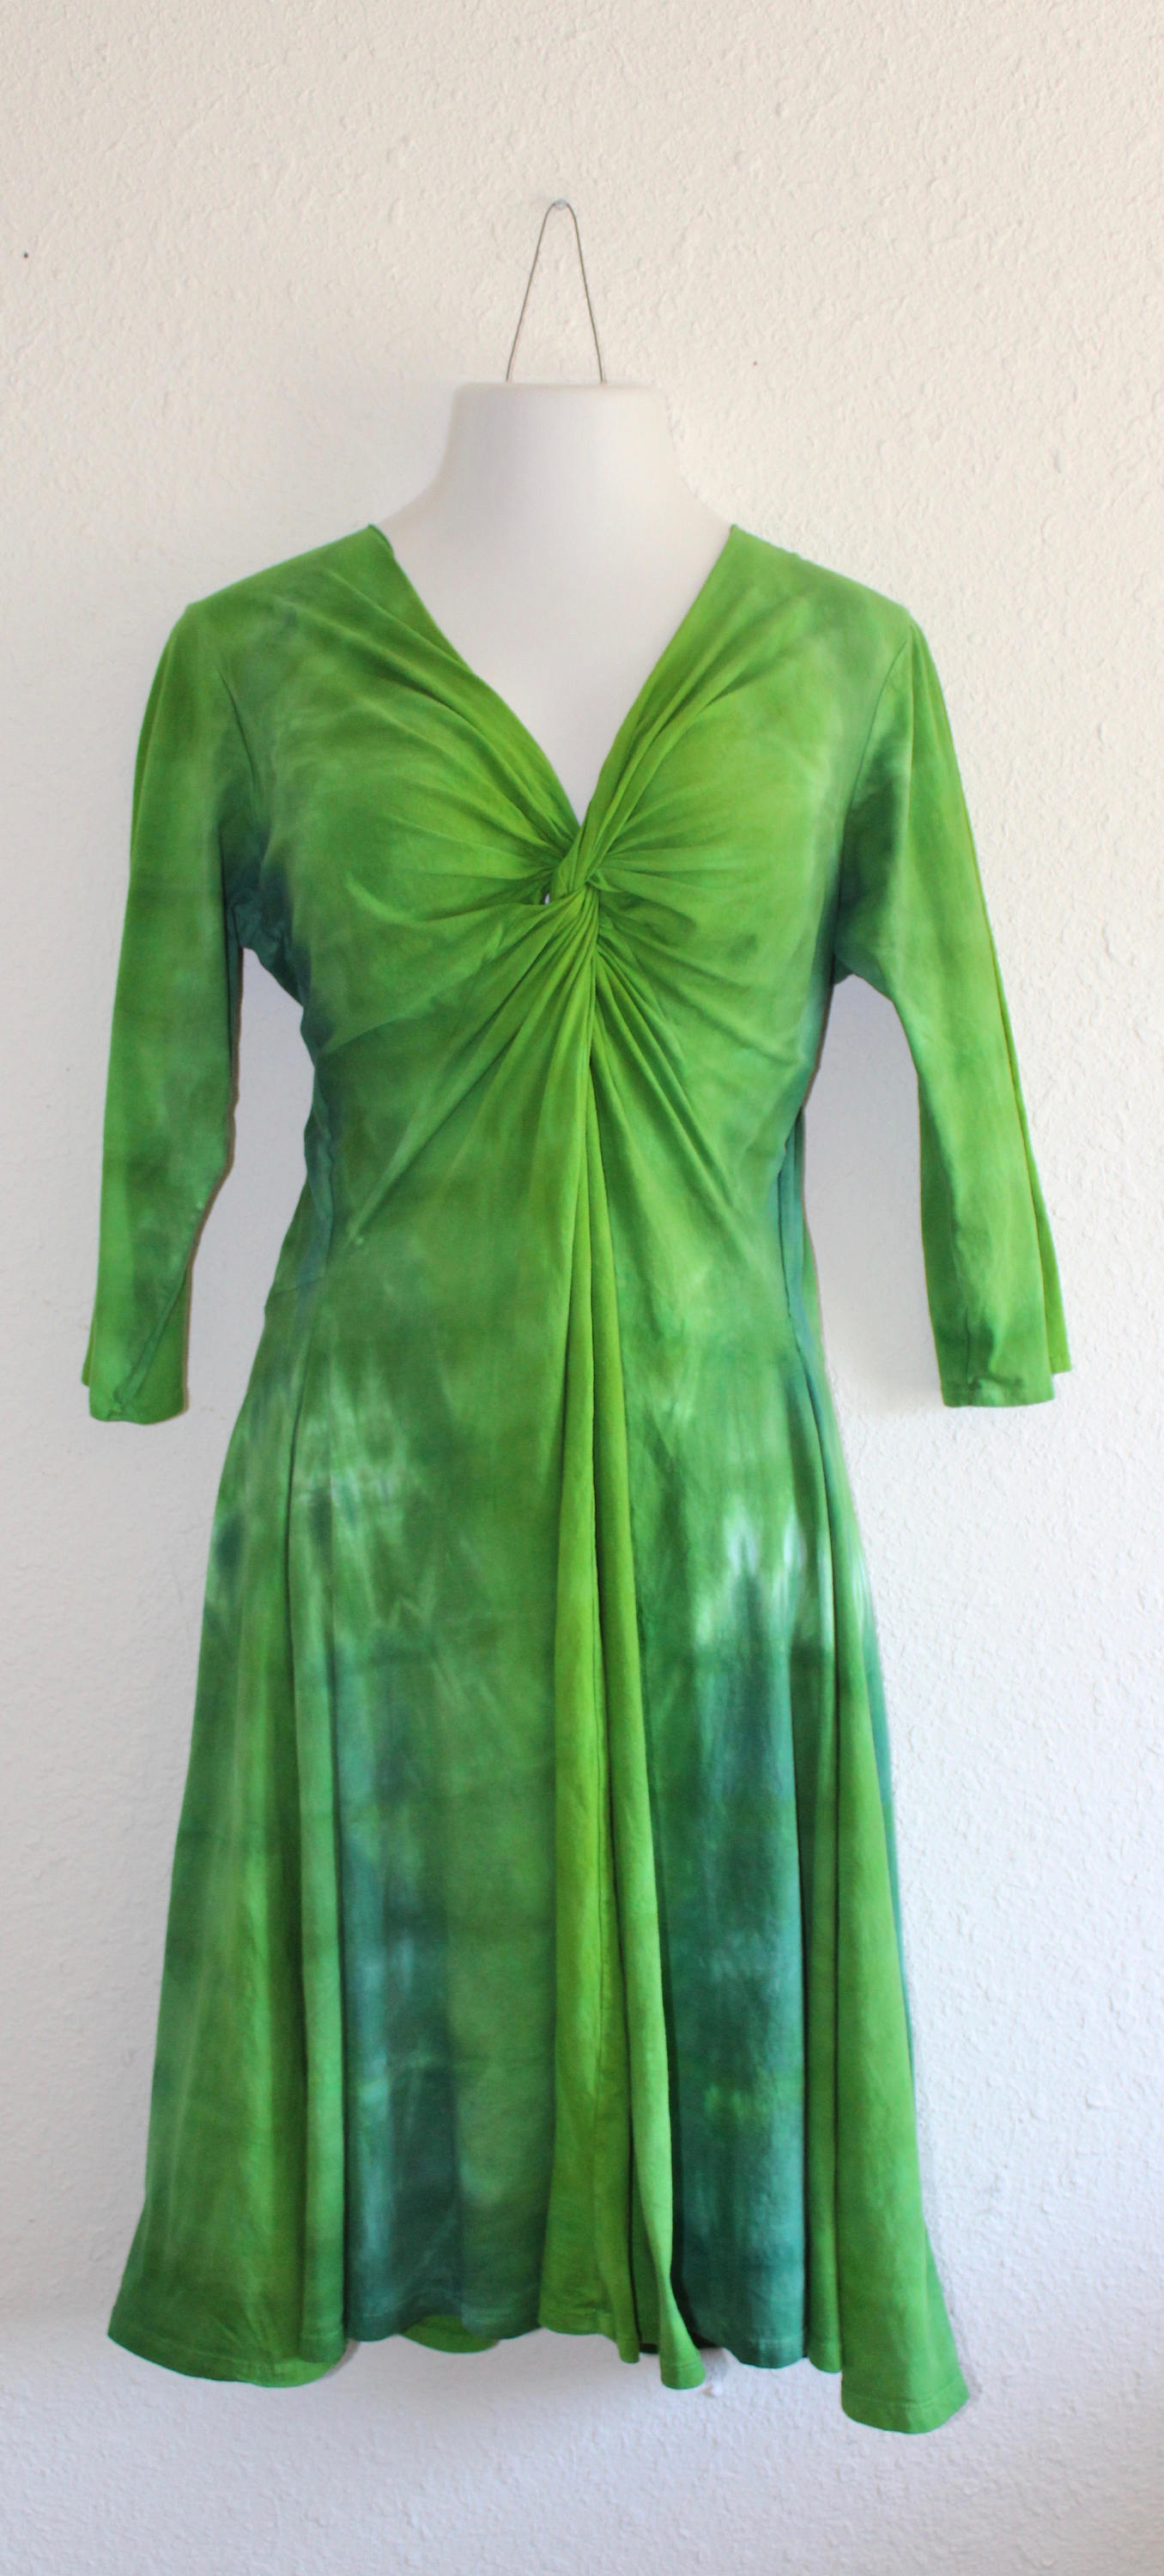 Twisted Front Dress Hand Dyed Ombre With Capped or 3/4 - Etsy